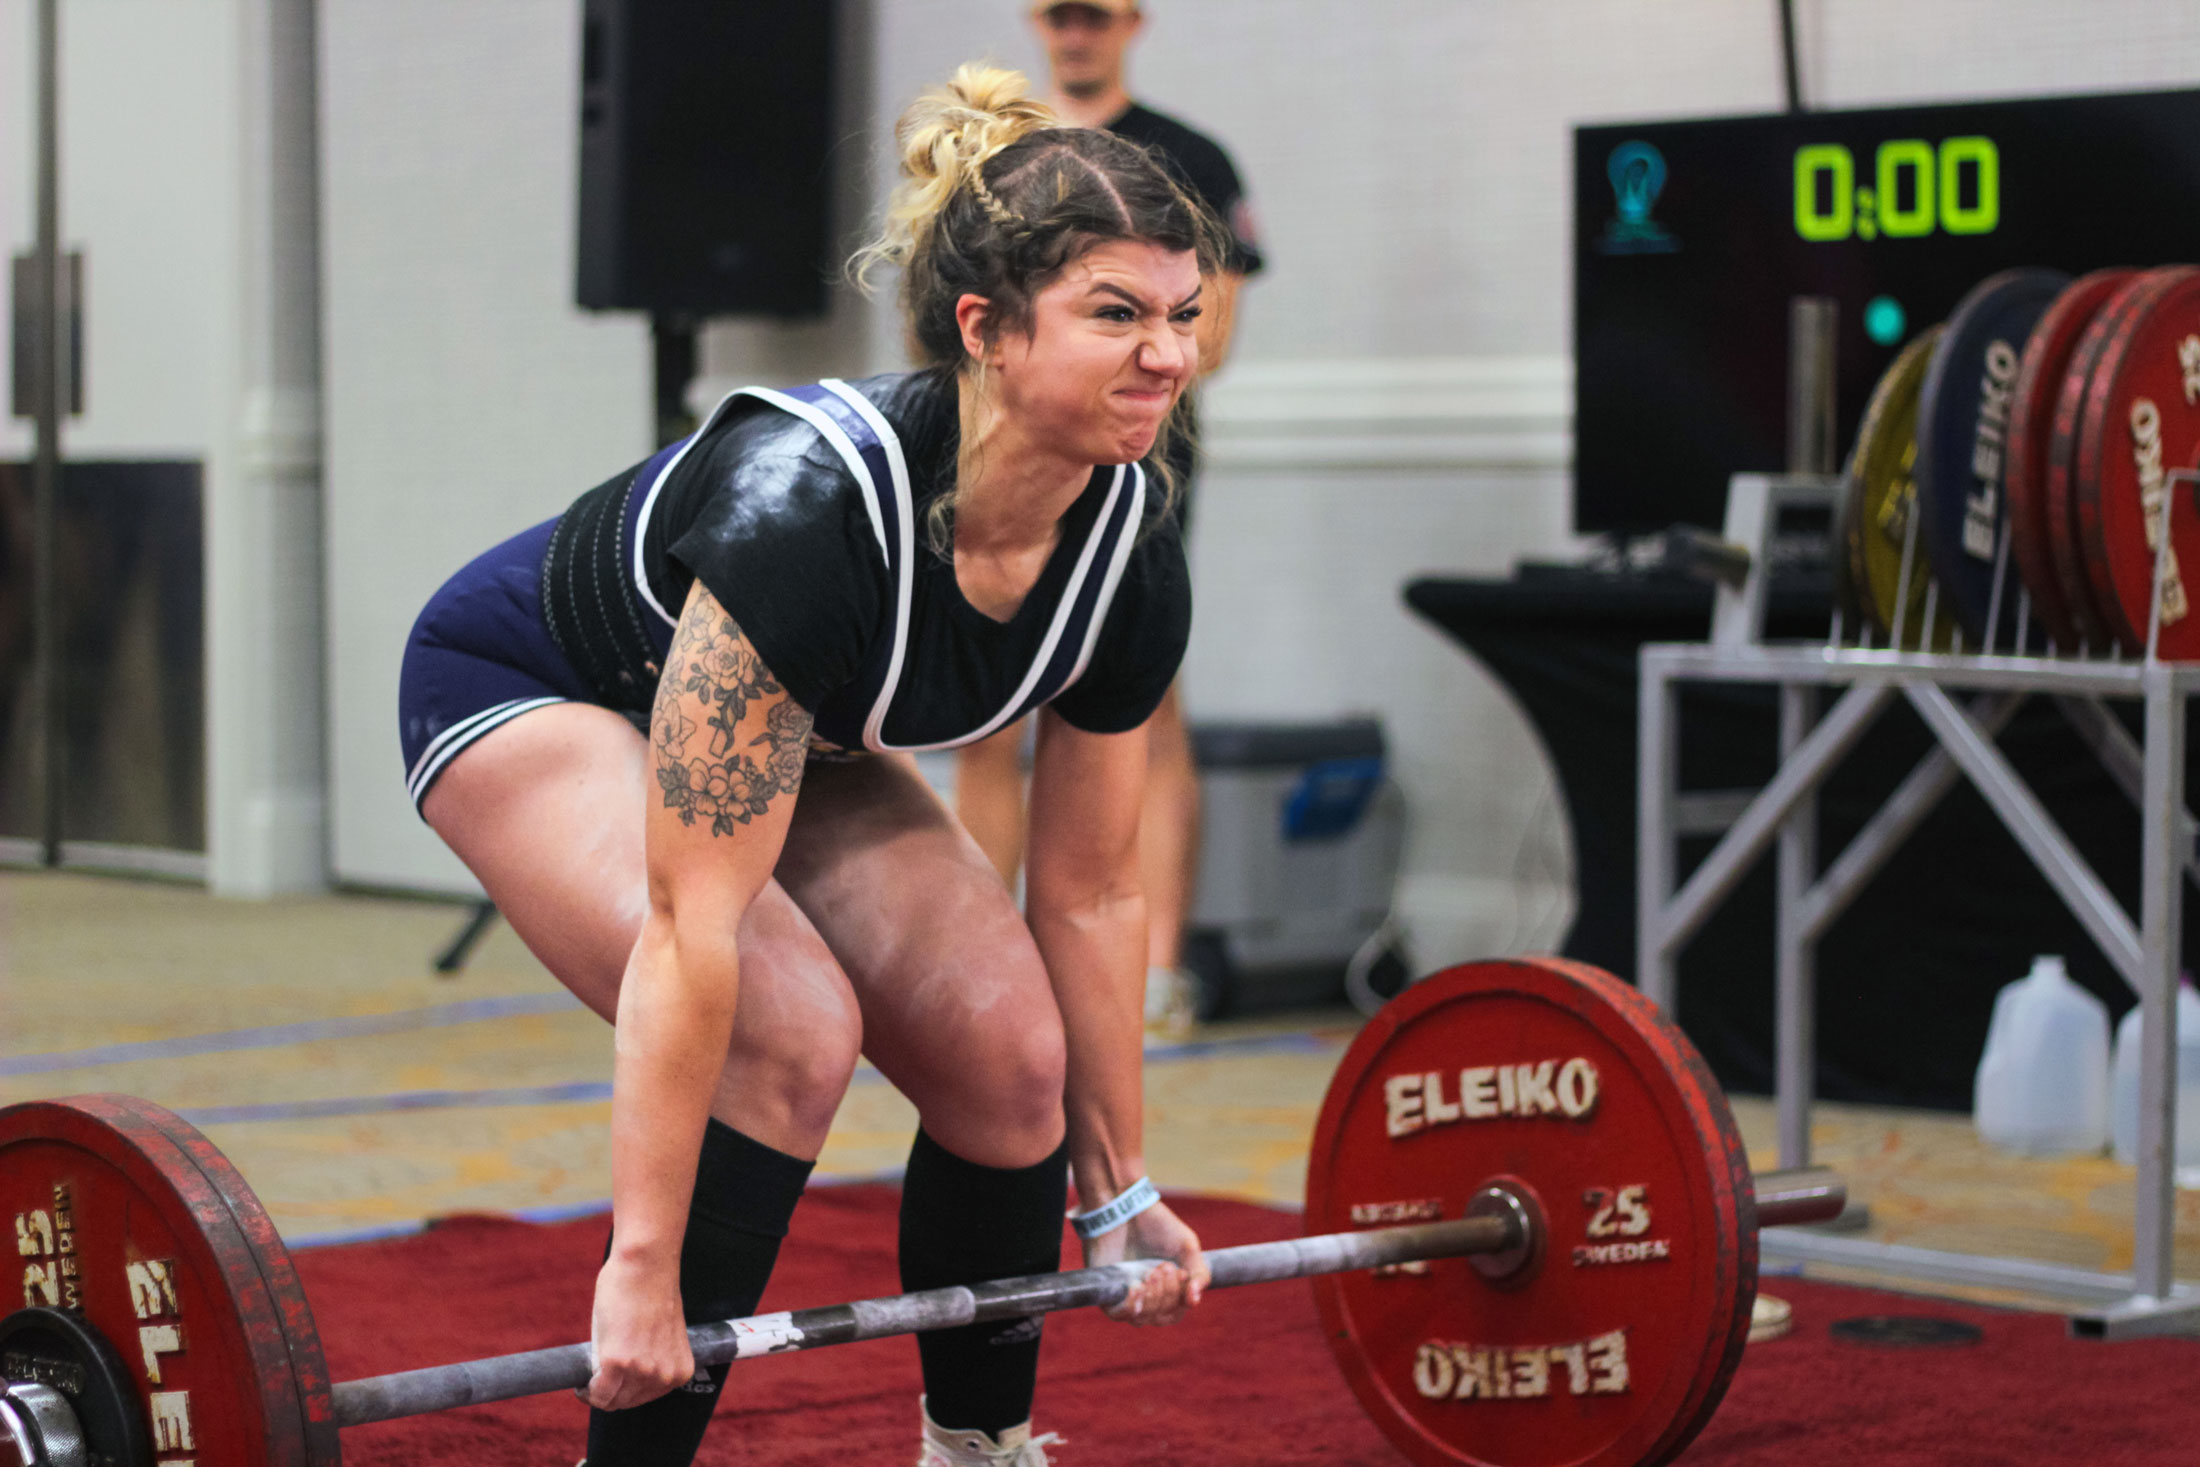 Florida Poly Women's Powerlifting readies for national title